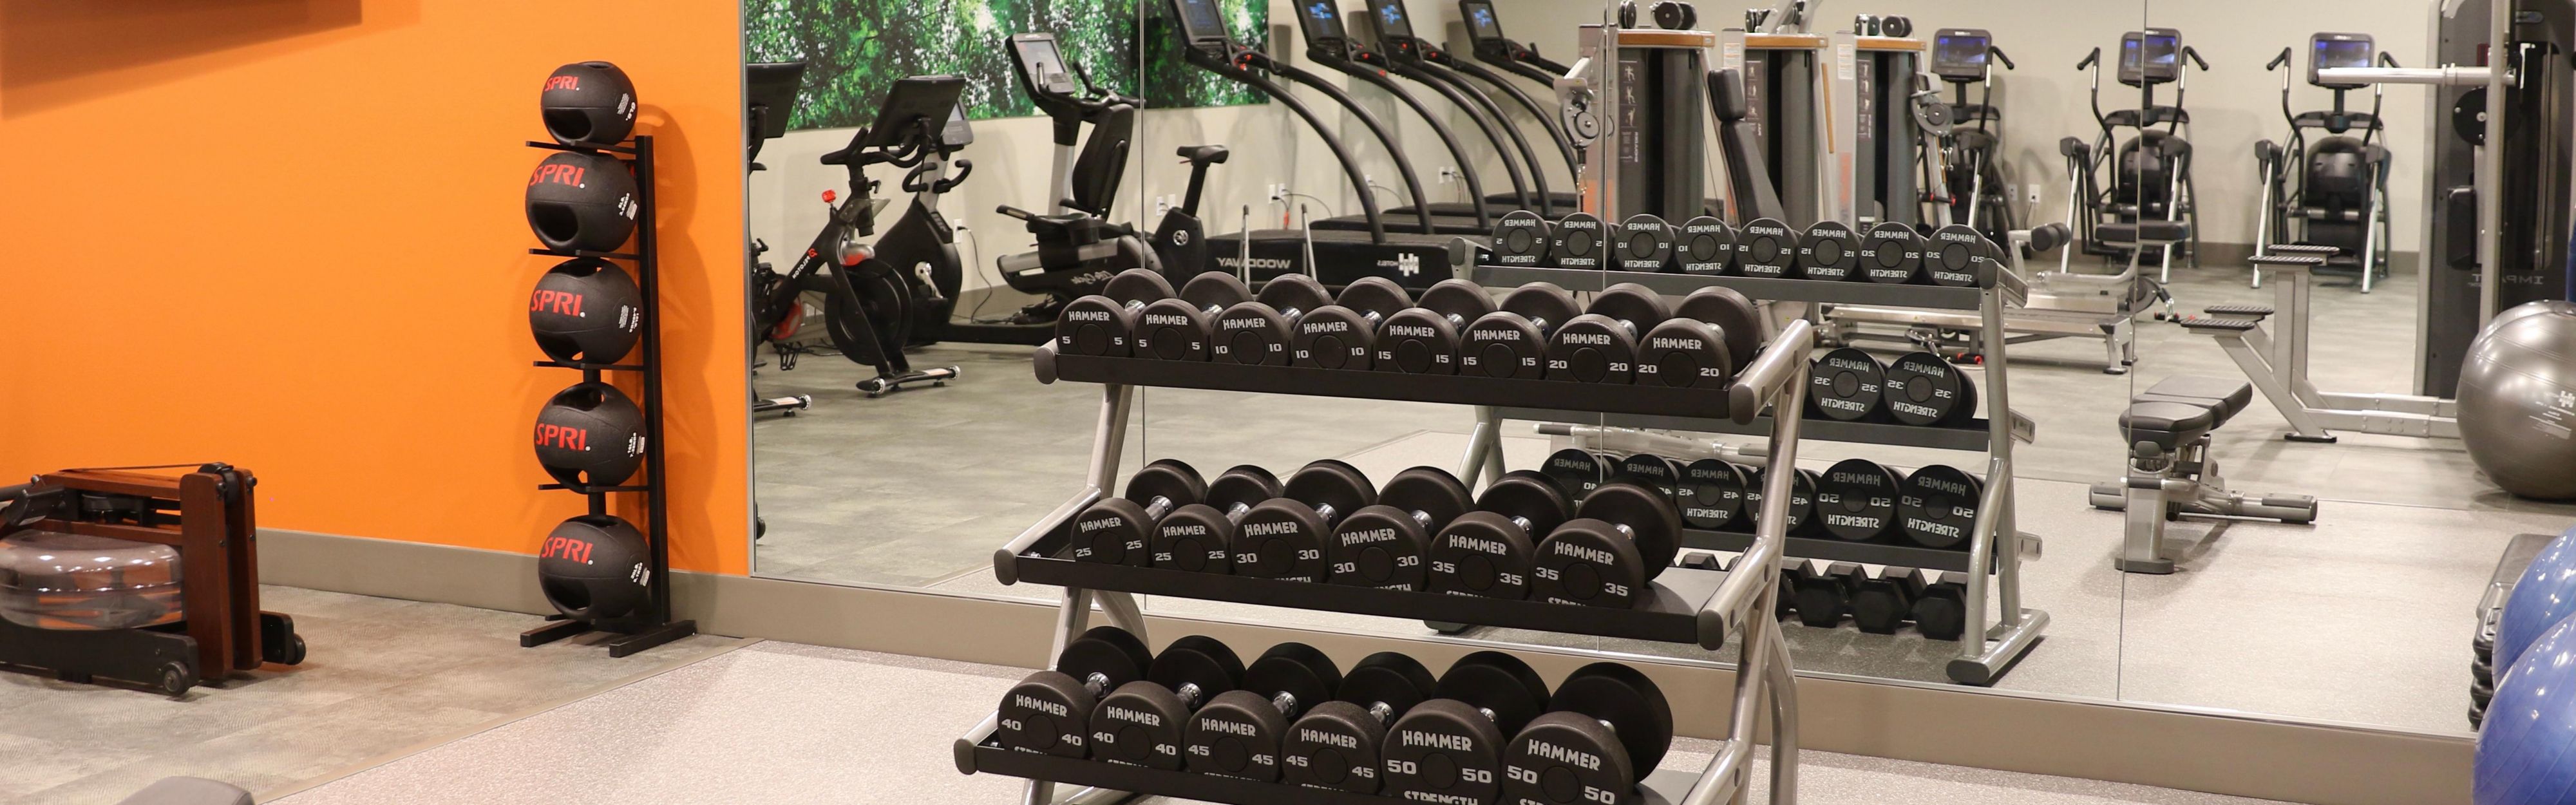 We offer a fully equipped Fitness Center that you can enjoy.